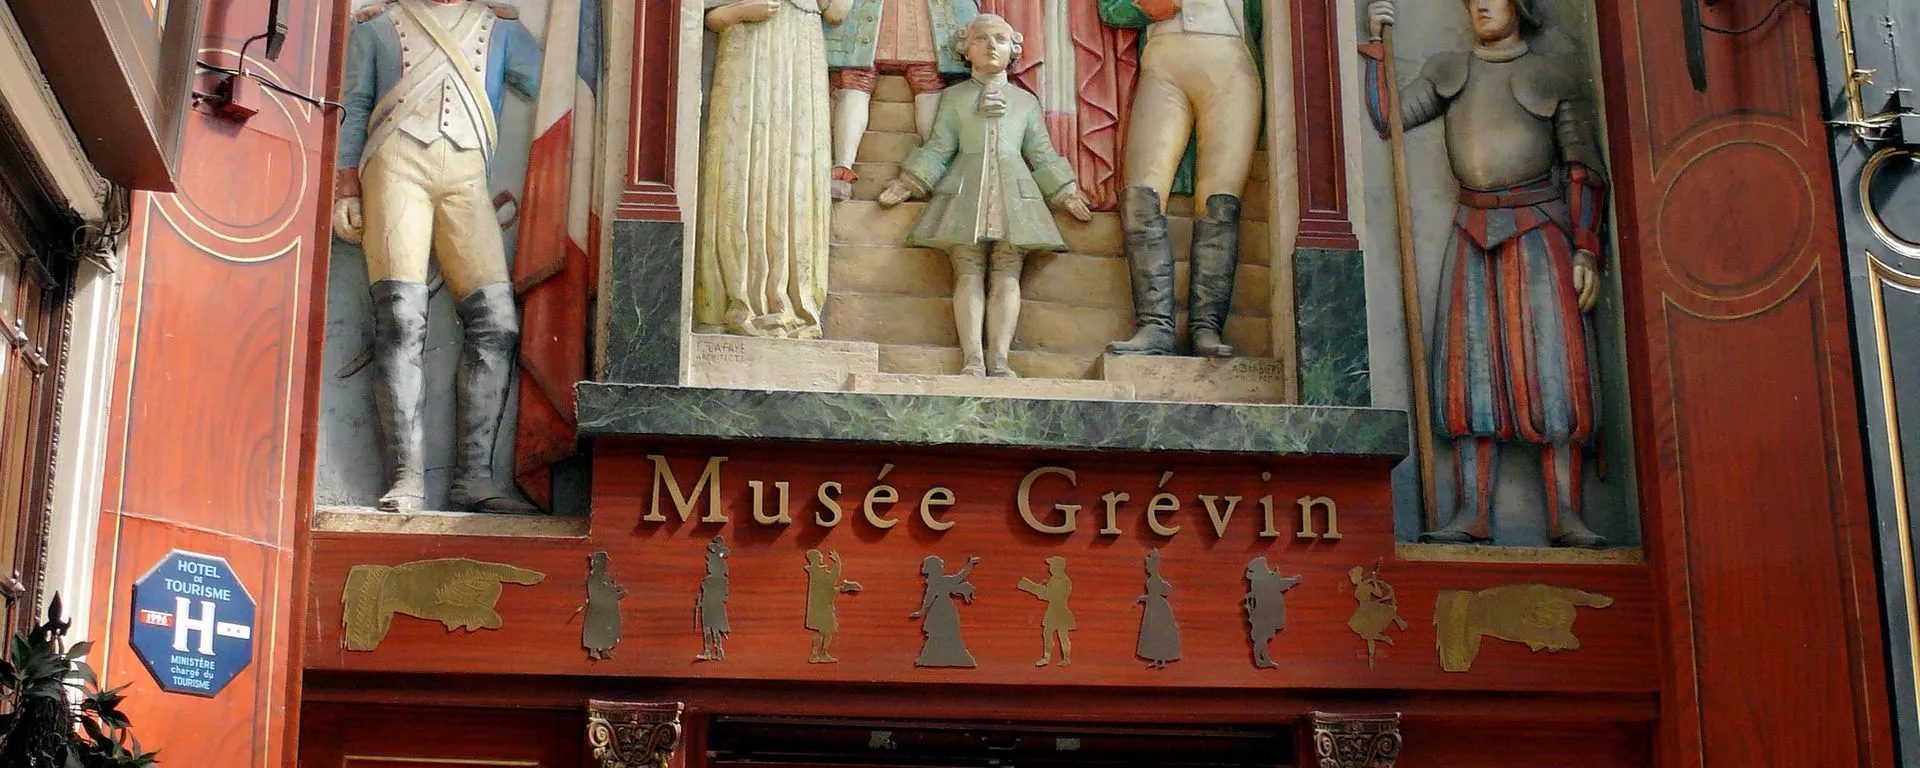 Grevin Museum in France, Europe | Museums - Rated 3.9